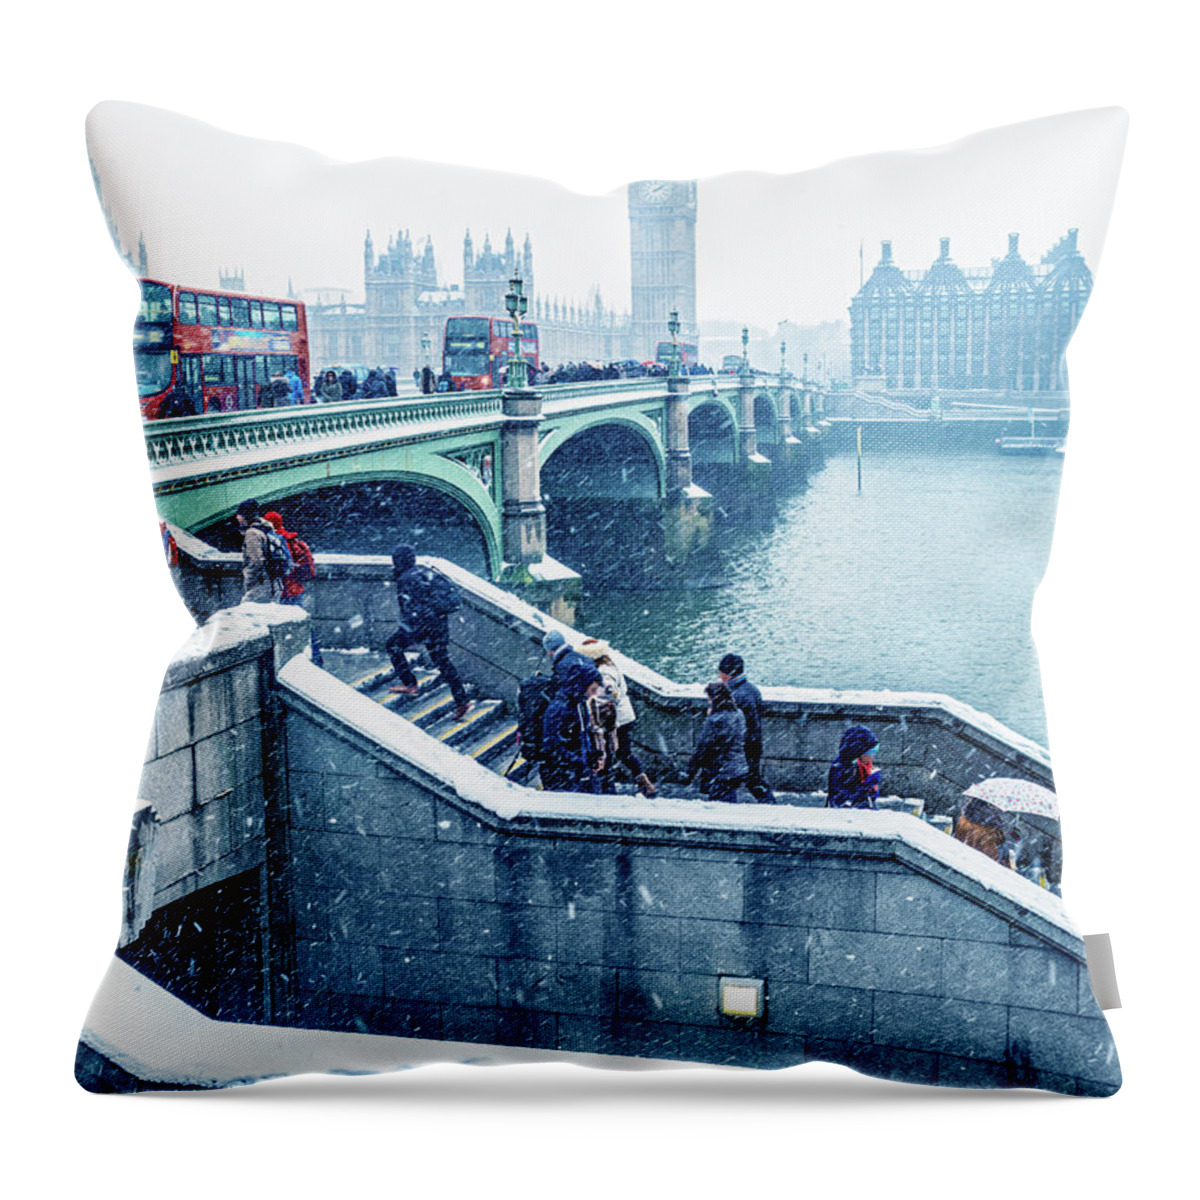 Steps Throw Pillow featuring the photograph Commuters Using Westminster Bridge In by Doug Armand